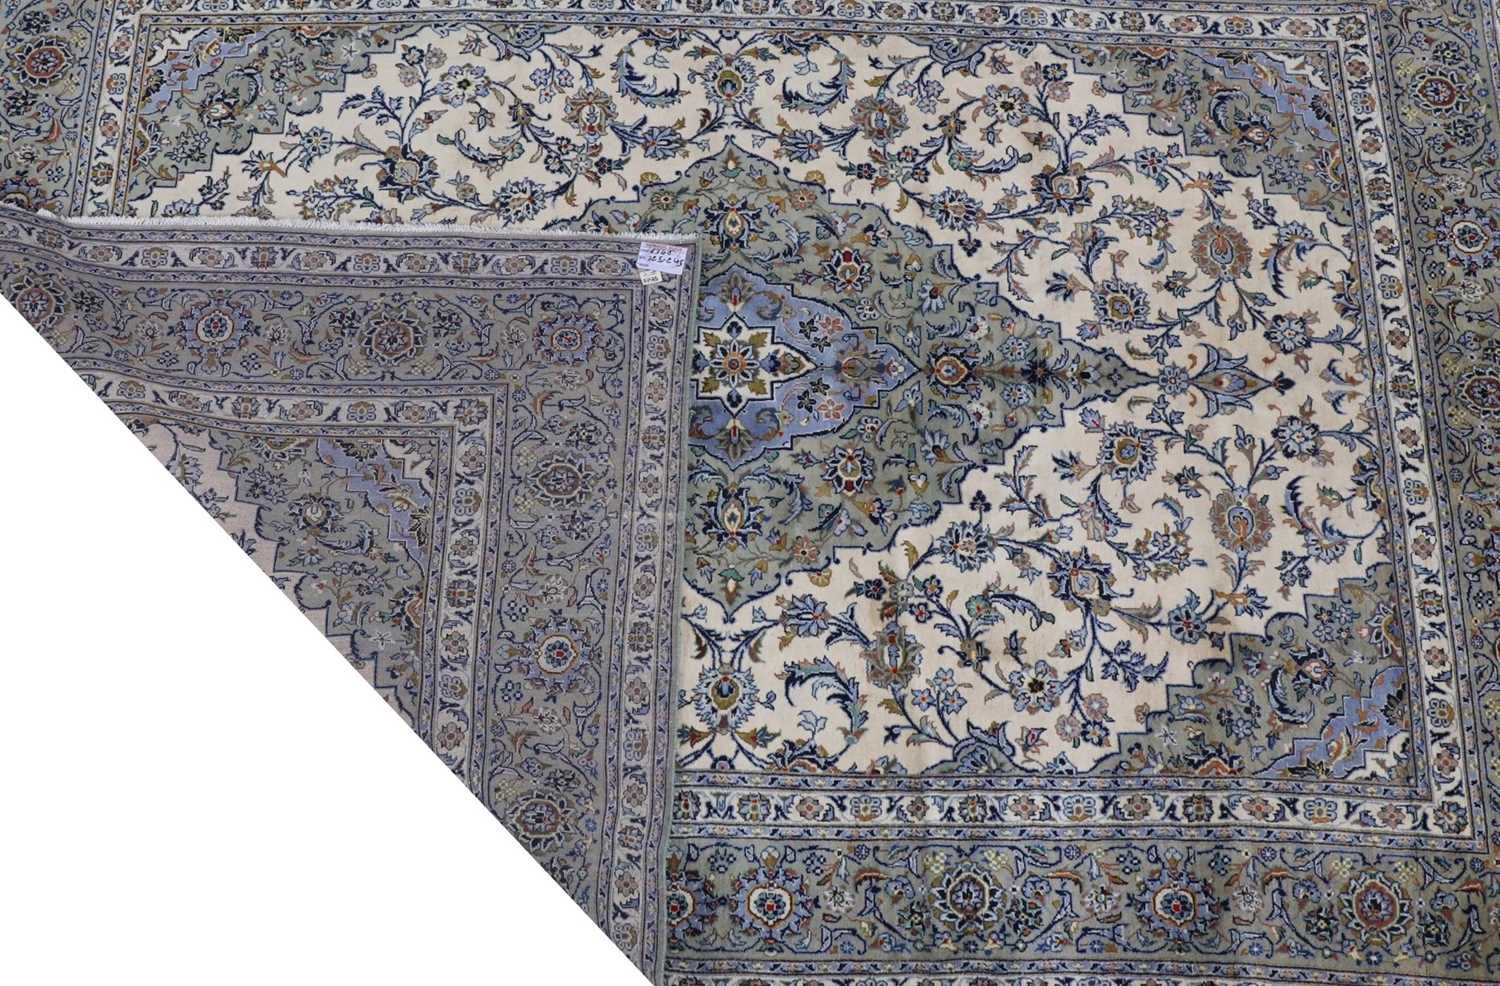 20th century Persian Kashan rug with central lozenge shaped medallion, scrolling floral and foliate - Image 2 of 10